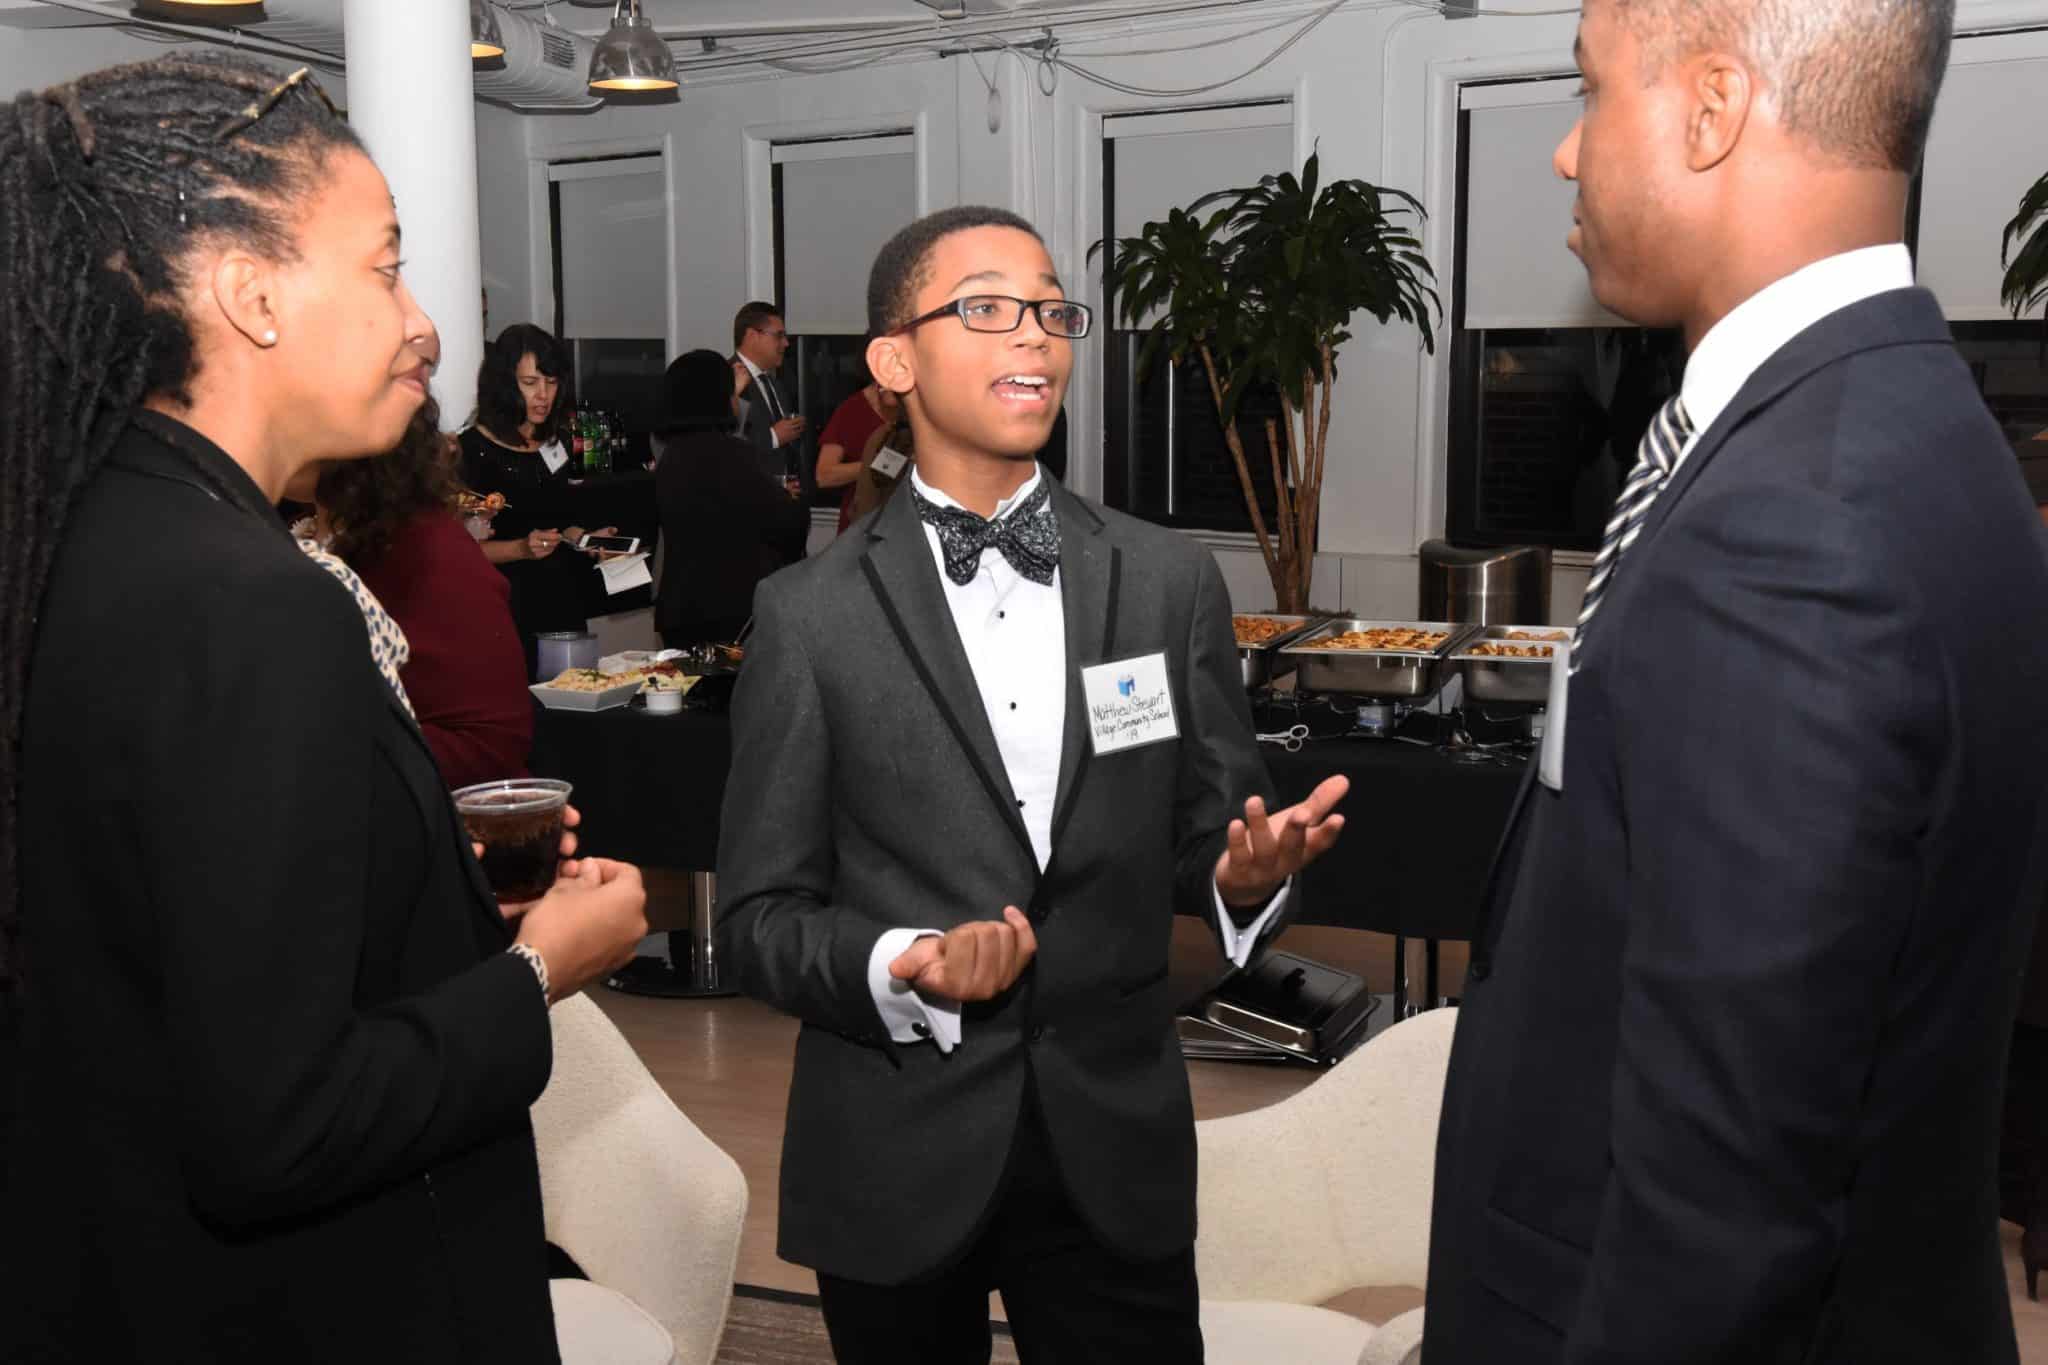 Scholar talking with attendees at Builde A Dream event in 2017